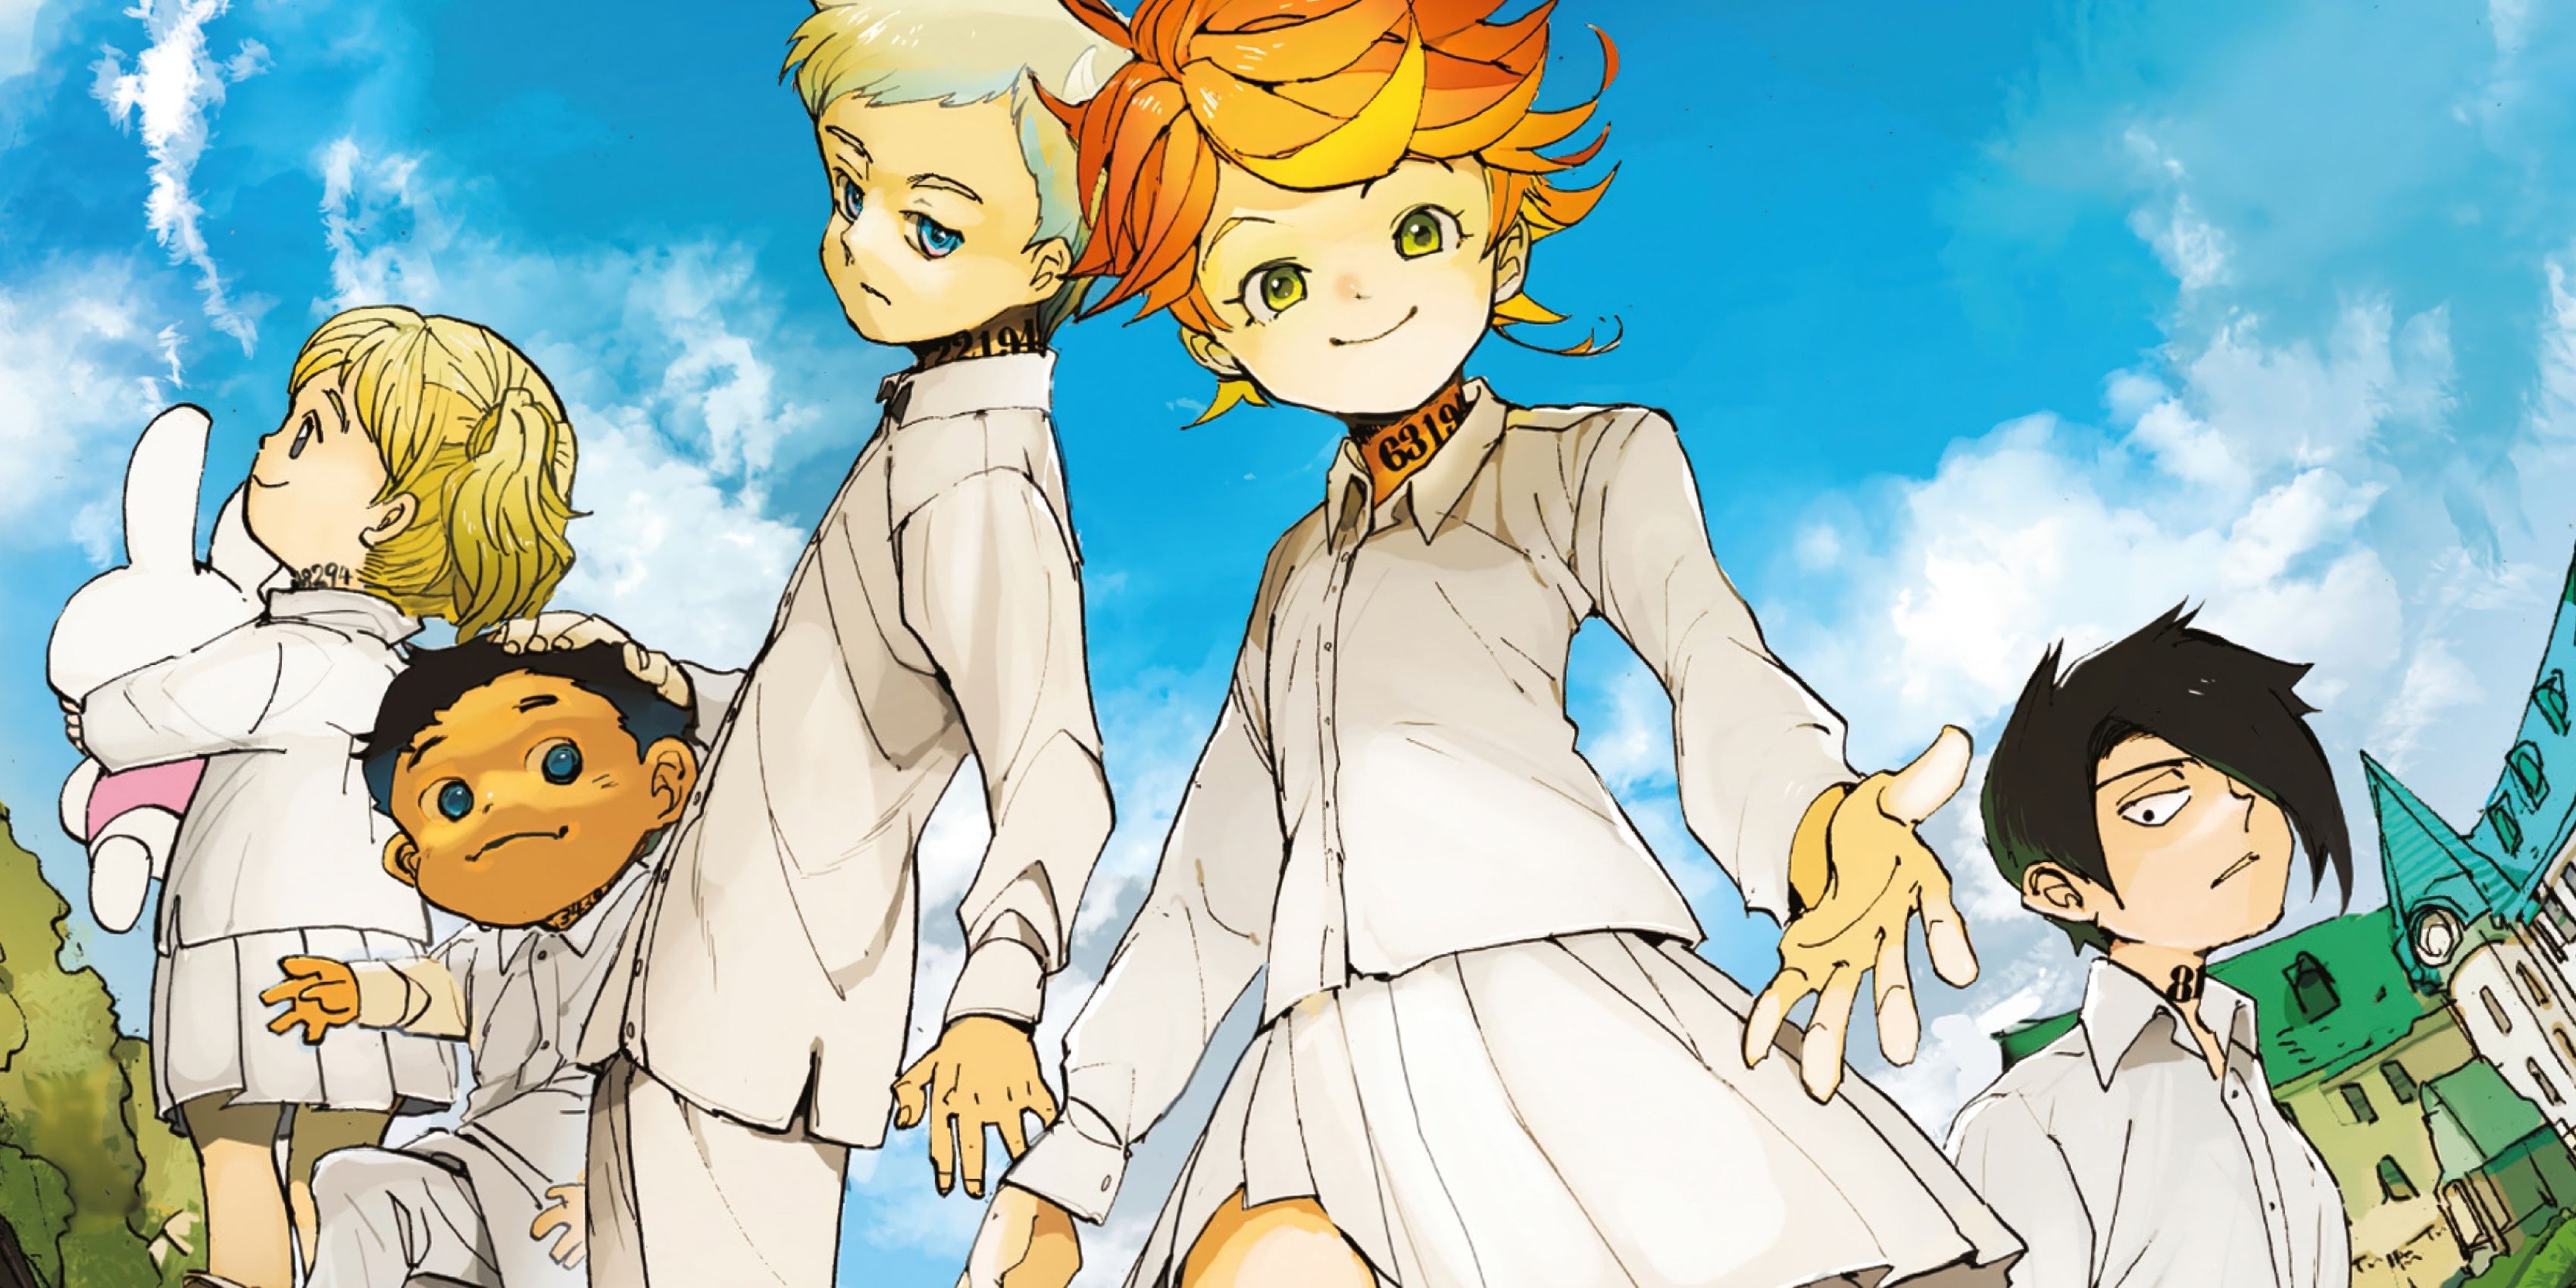 Emma Ray Norman The Promised Neverland